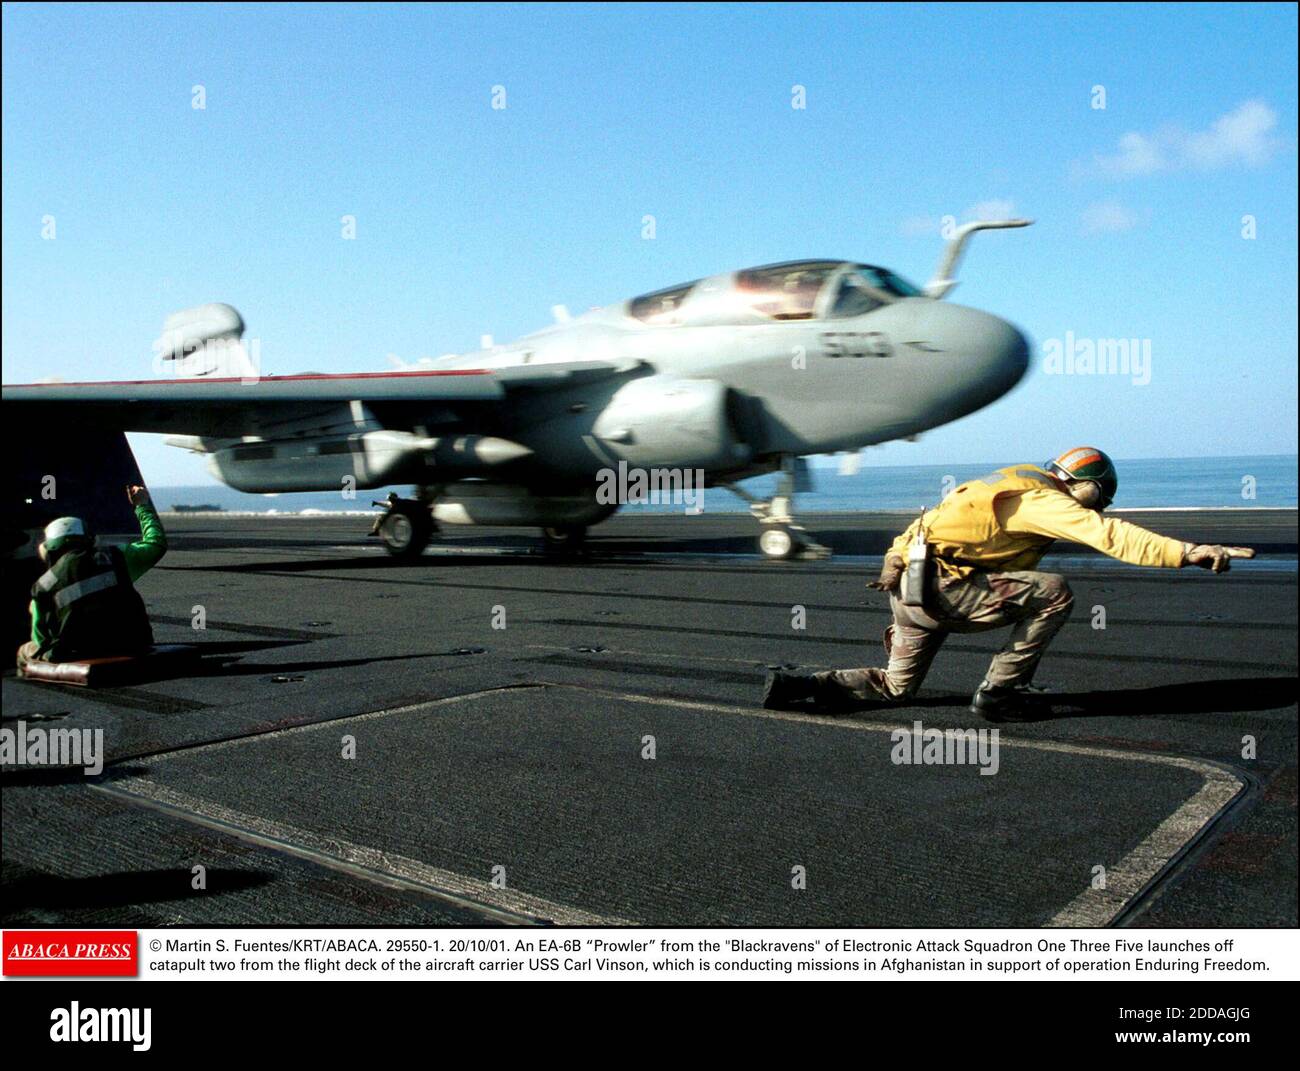 NO FILM, NO VIDEO, NO TV, NO DOCUMENTARY - © Martin S. Fuentes/KRT/ABACA. 29550-1. 20/10/01. An EA-6B Prowler from the Blackravens of Electronic Attack Squadron One Three Five launches off catapult two from the flight deck of the aircraft carrier USS Carl Vinson, which is conducting missions in Af Stock Photo